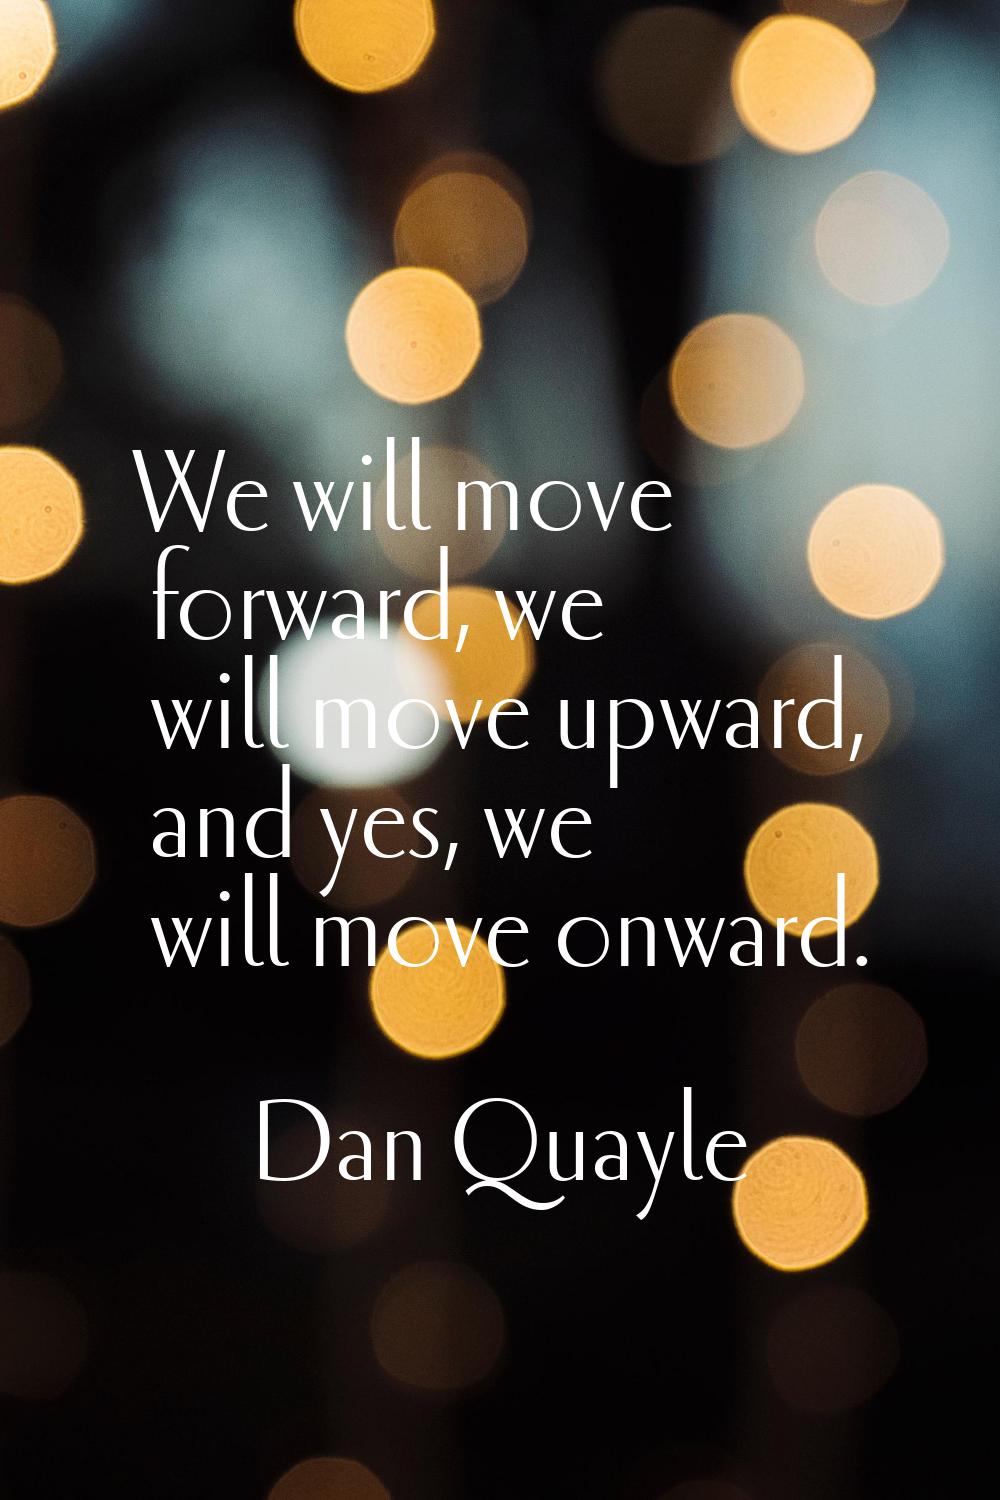 We will move forward, we will move upward, and yes, we will move onward.